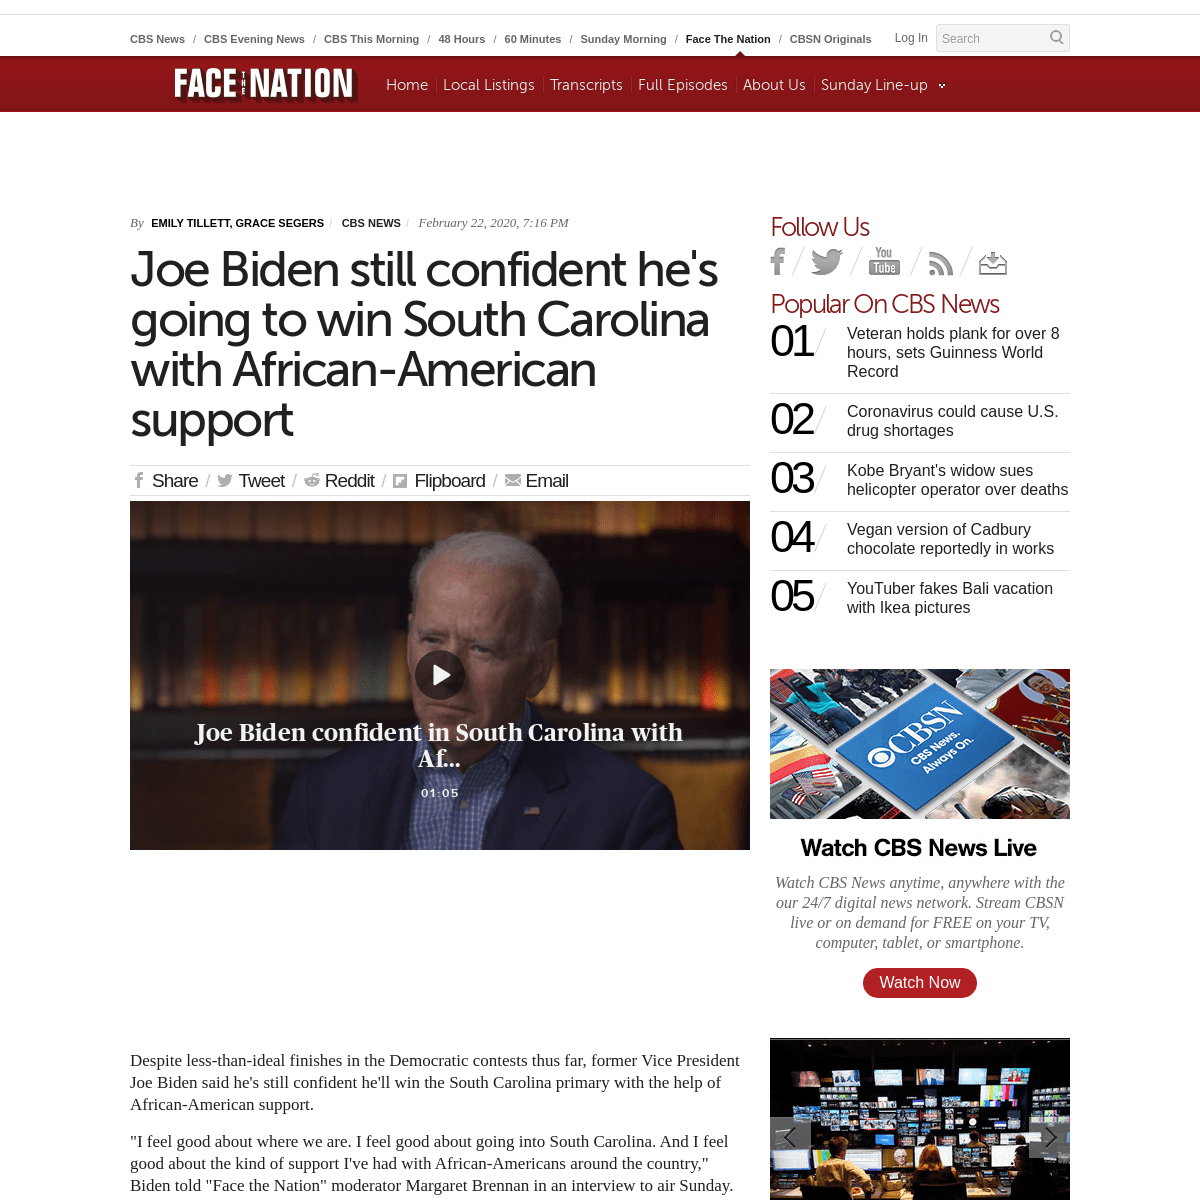 A complete backup of www.cbsnews.com/news/joe-biden-still-confident-hes-going-to-take-south-carolina-with-african-american-suppo